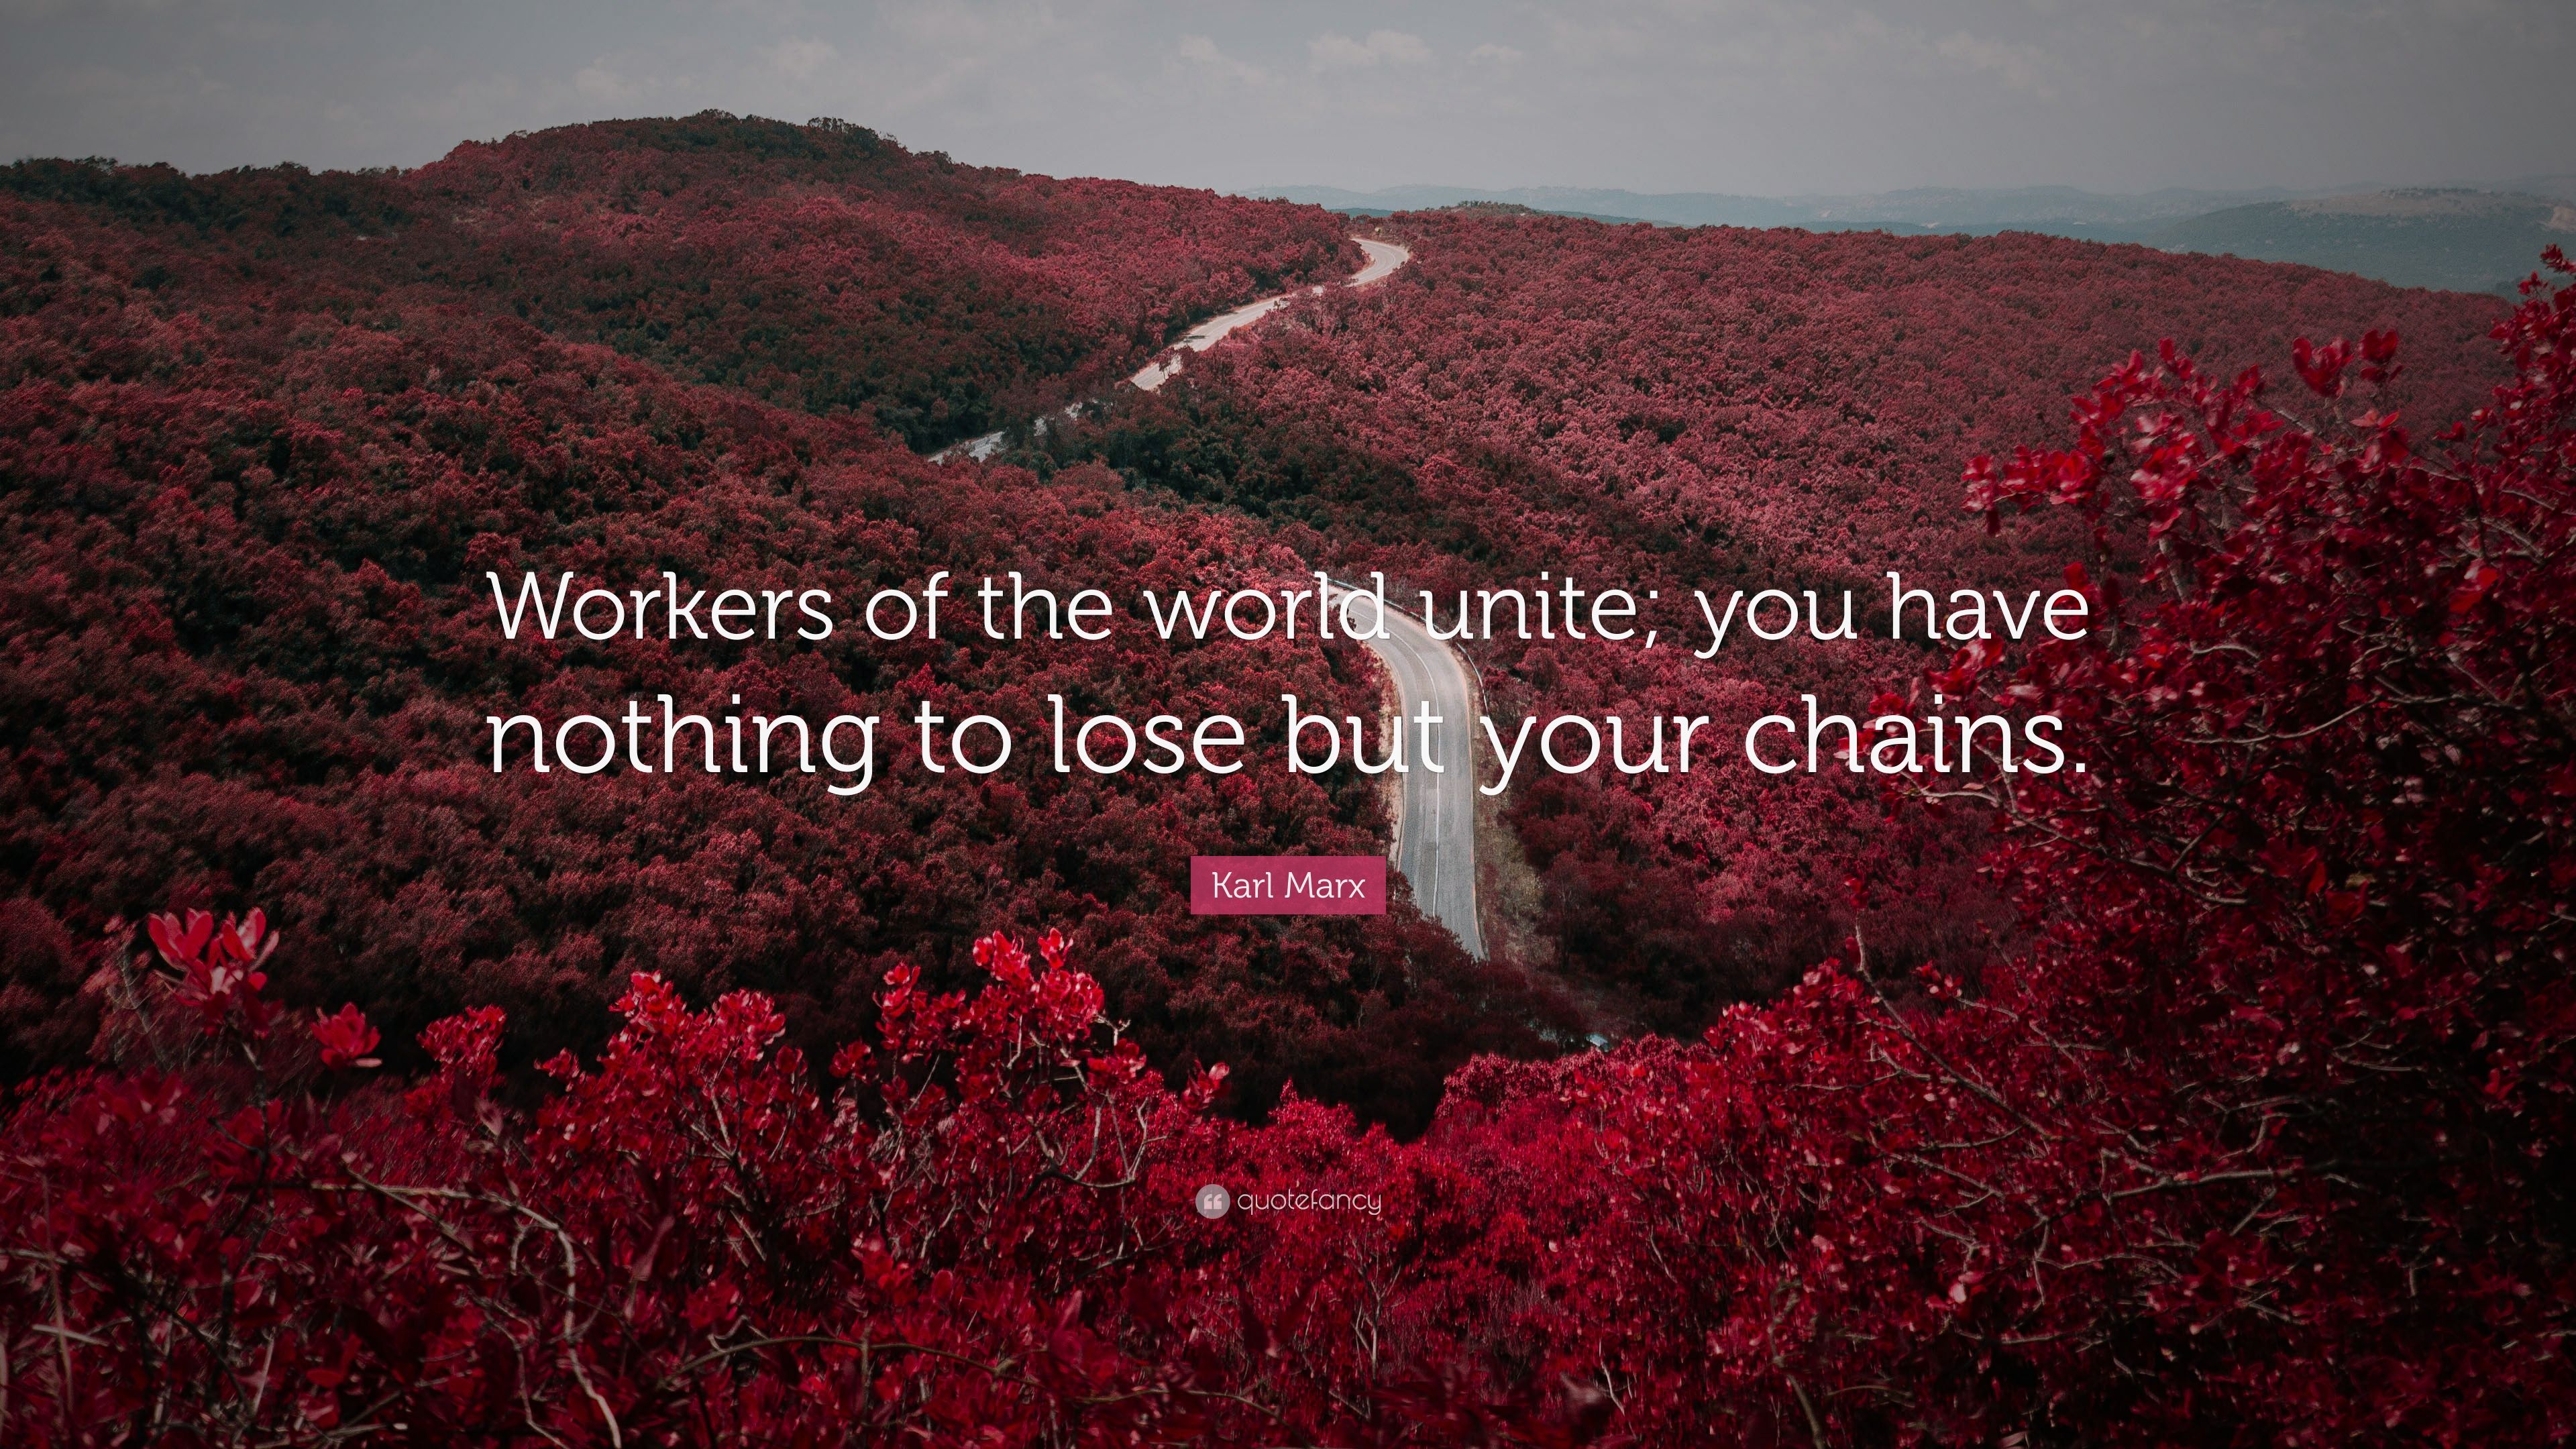 Karl Marx Quote: “Workers of the world unite; you have nothing to